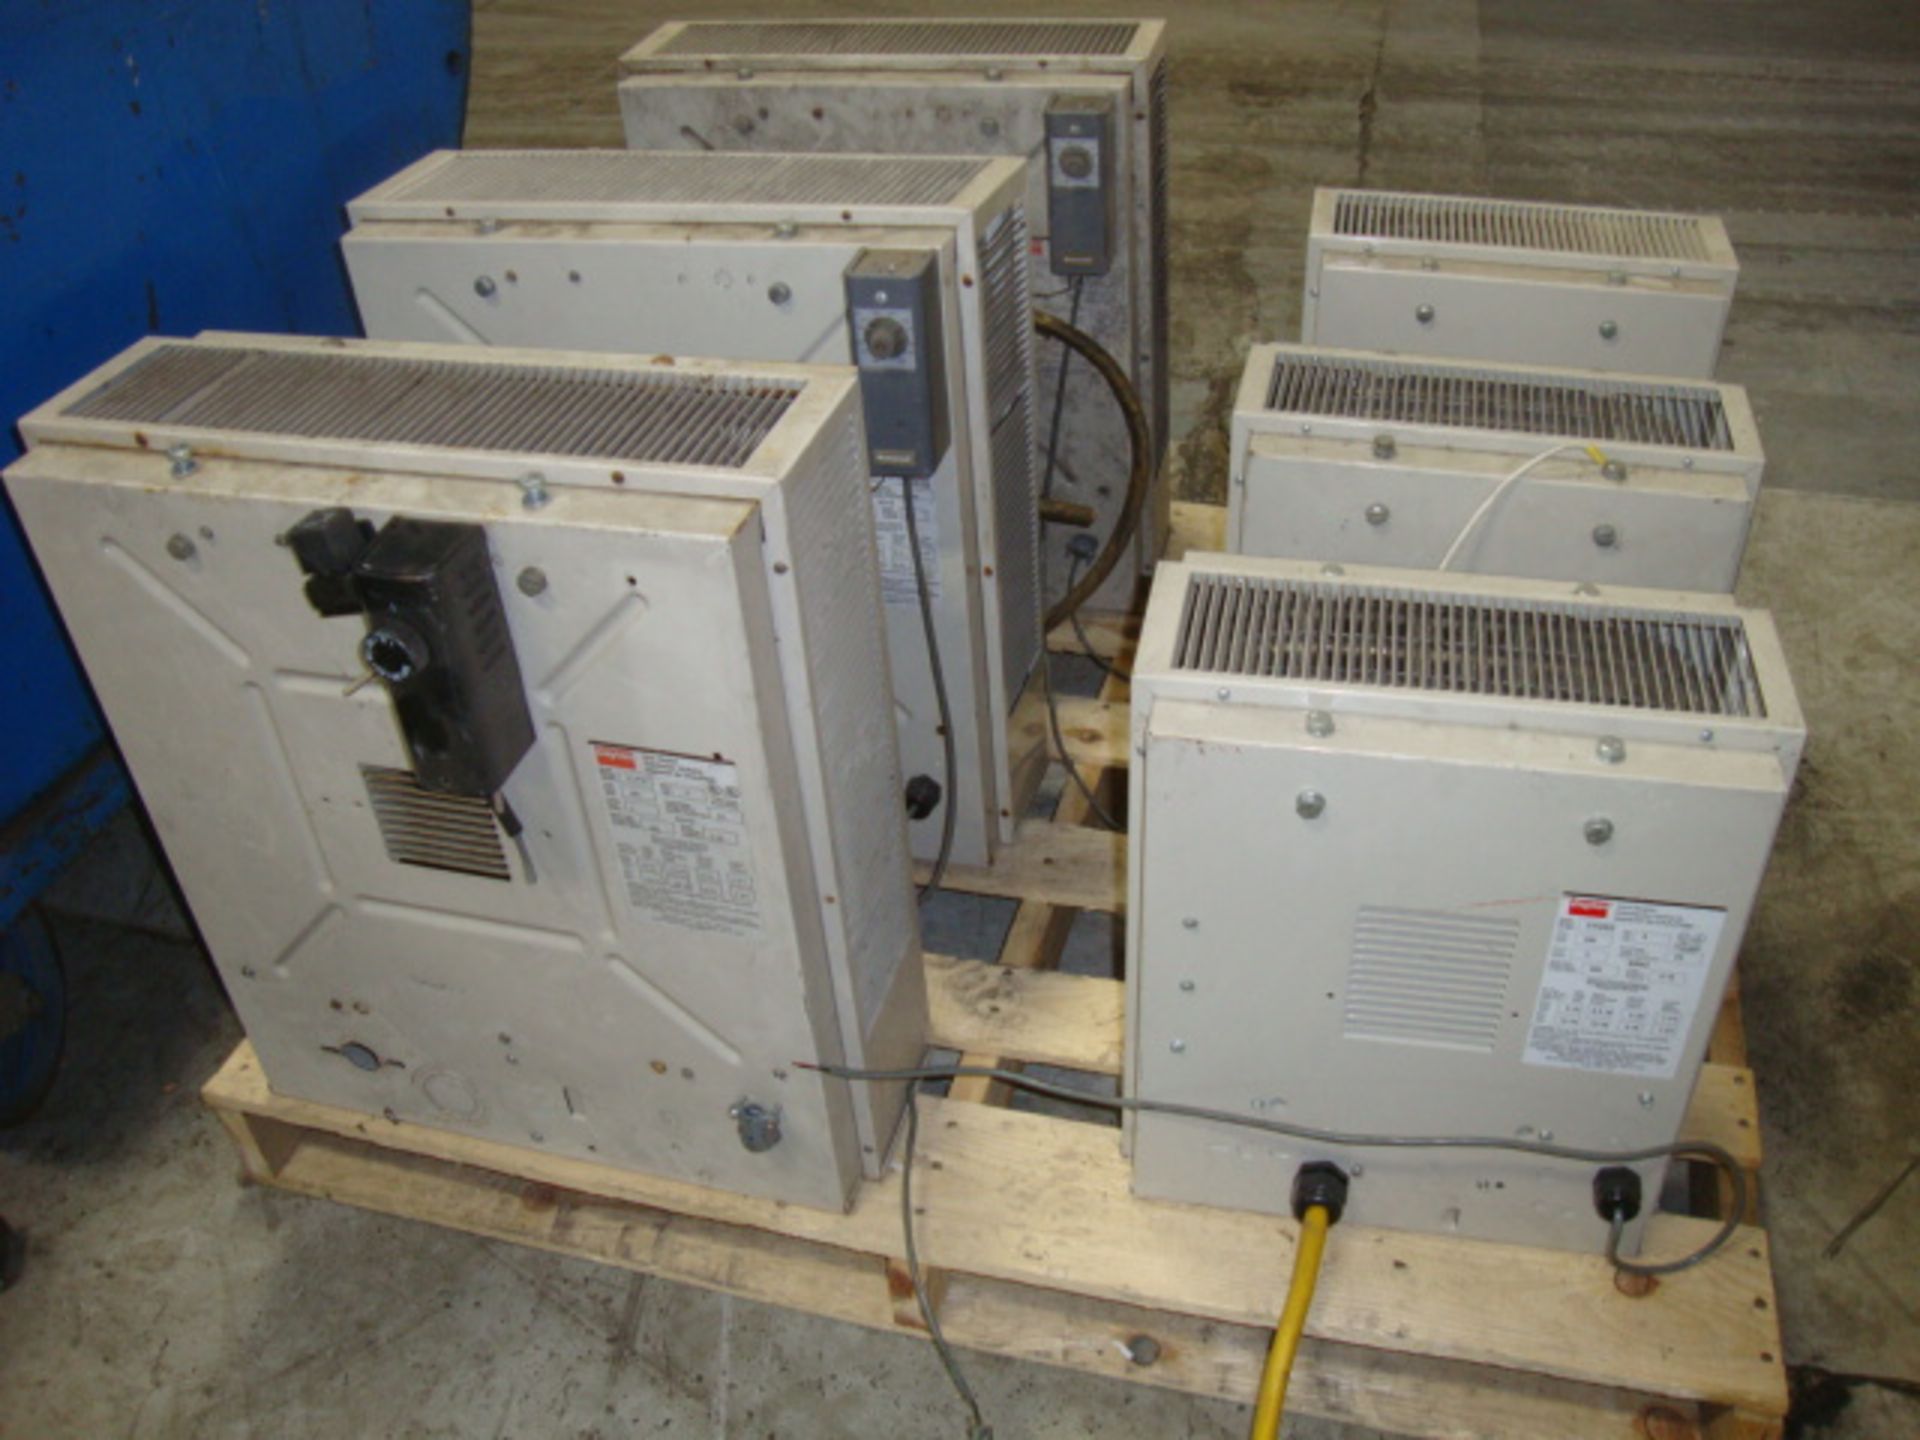 Lot of 6 Dayton Electric Heaters, 3 Model 3UF87 and 3 Model # 2YU63, 480V, 3ph - Image 3 of 3